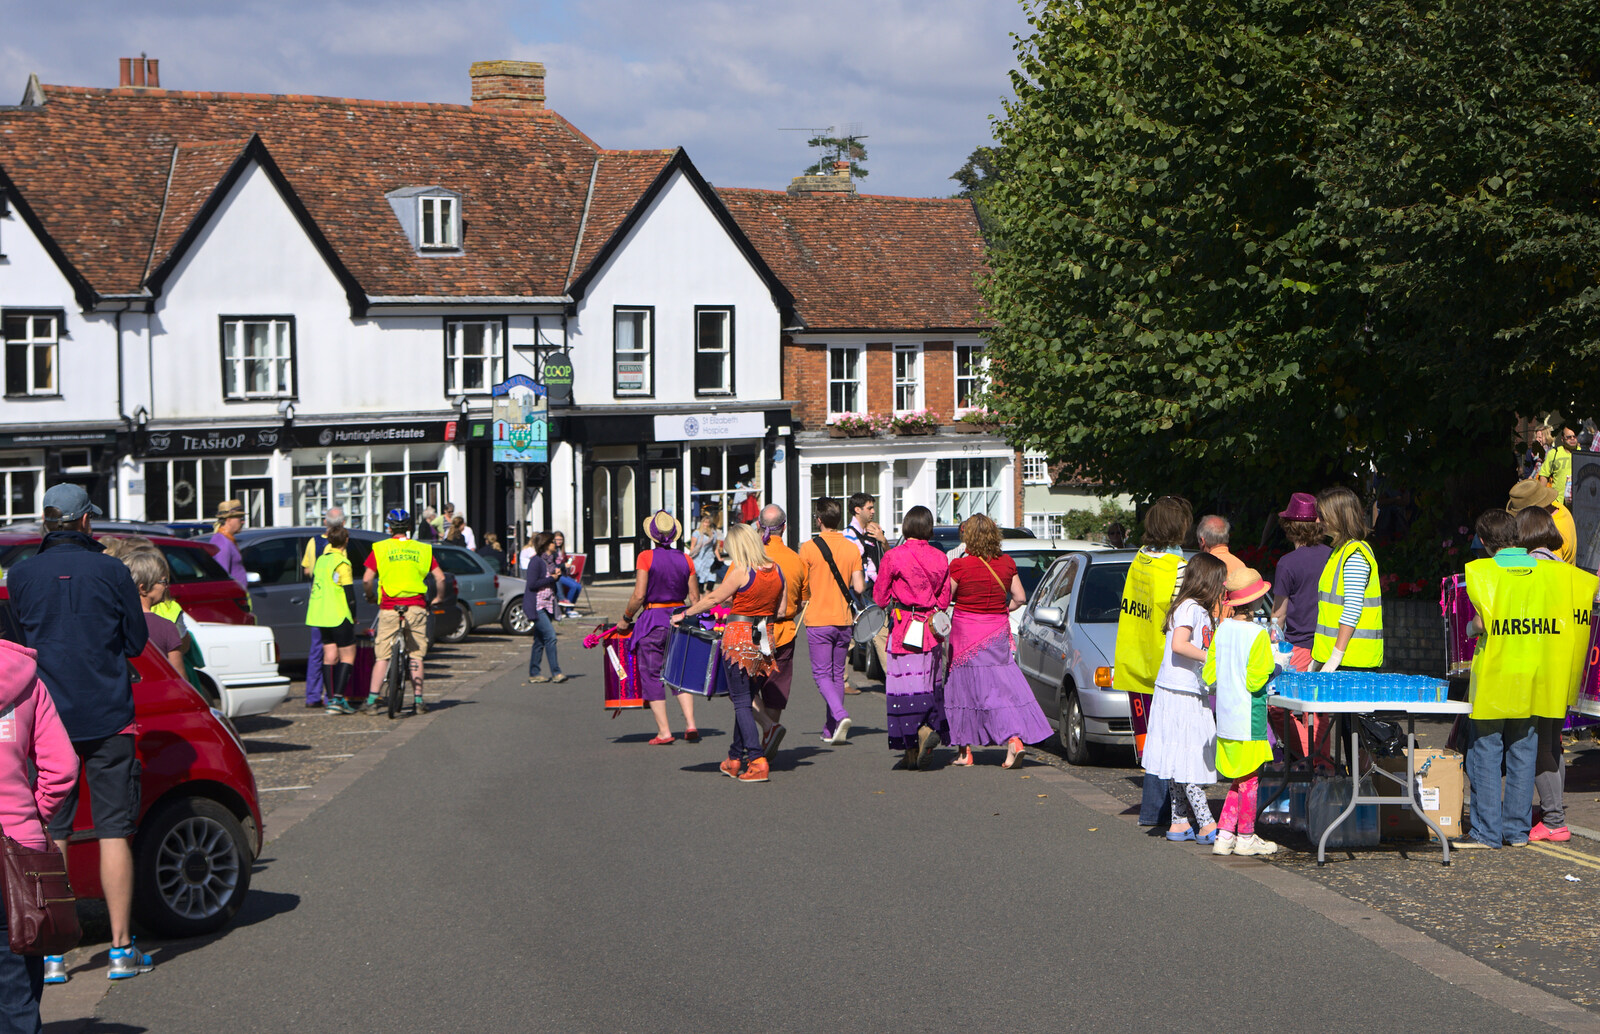 Crowds and musicians assemble on Market Hill from The Framlingham 10k Run, Suffolk - 31st August 2014